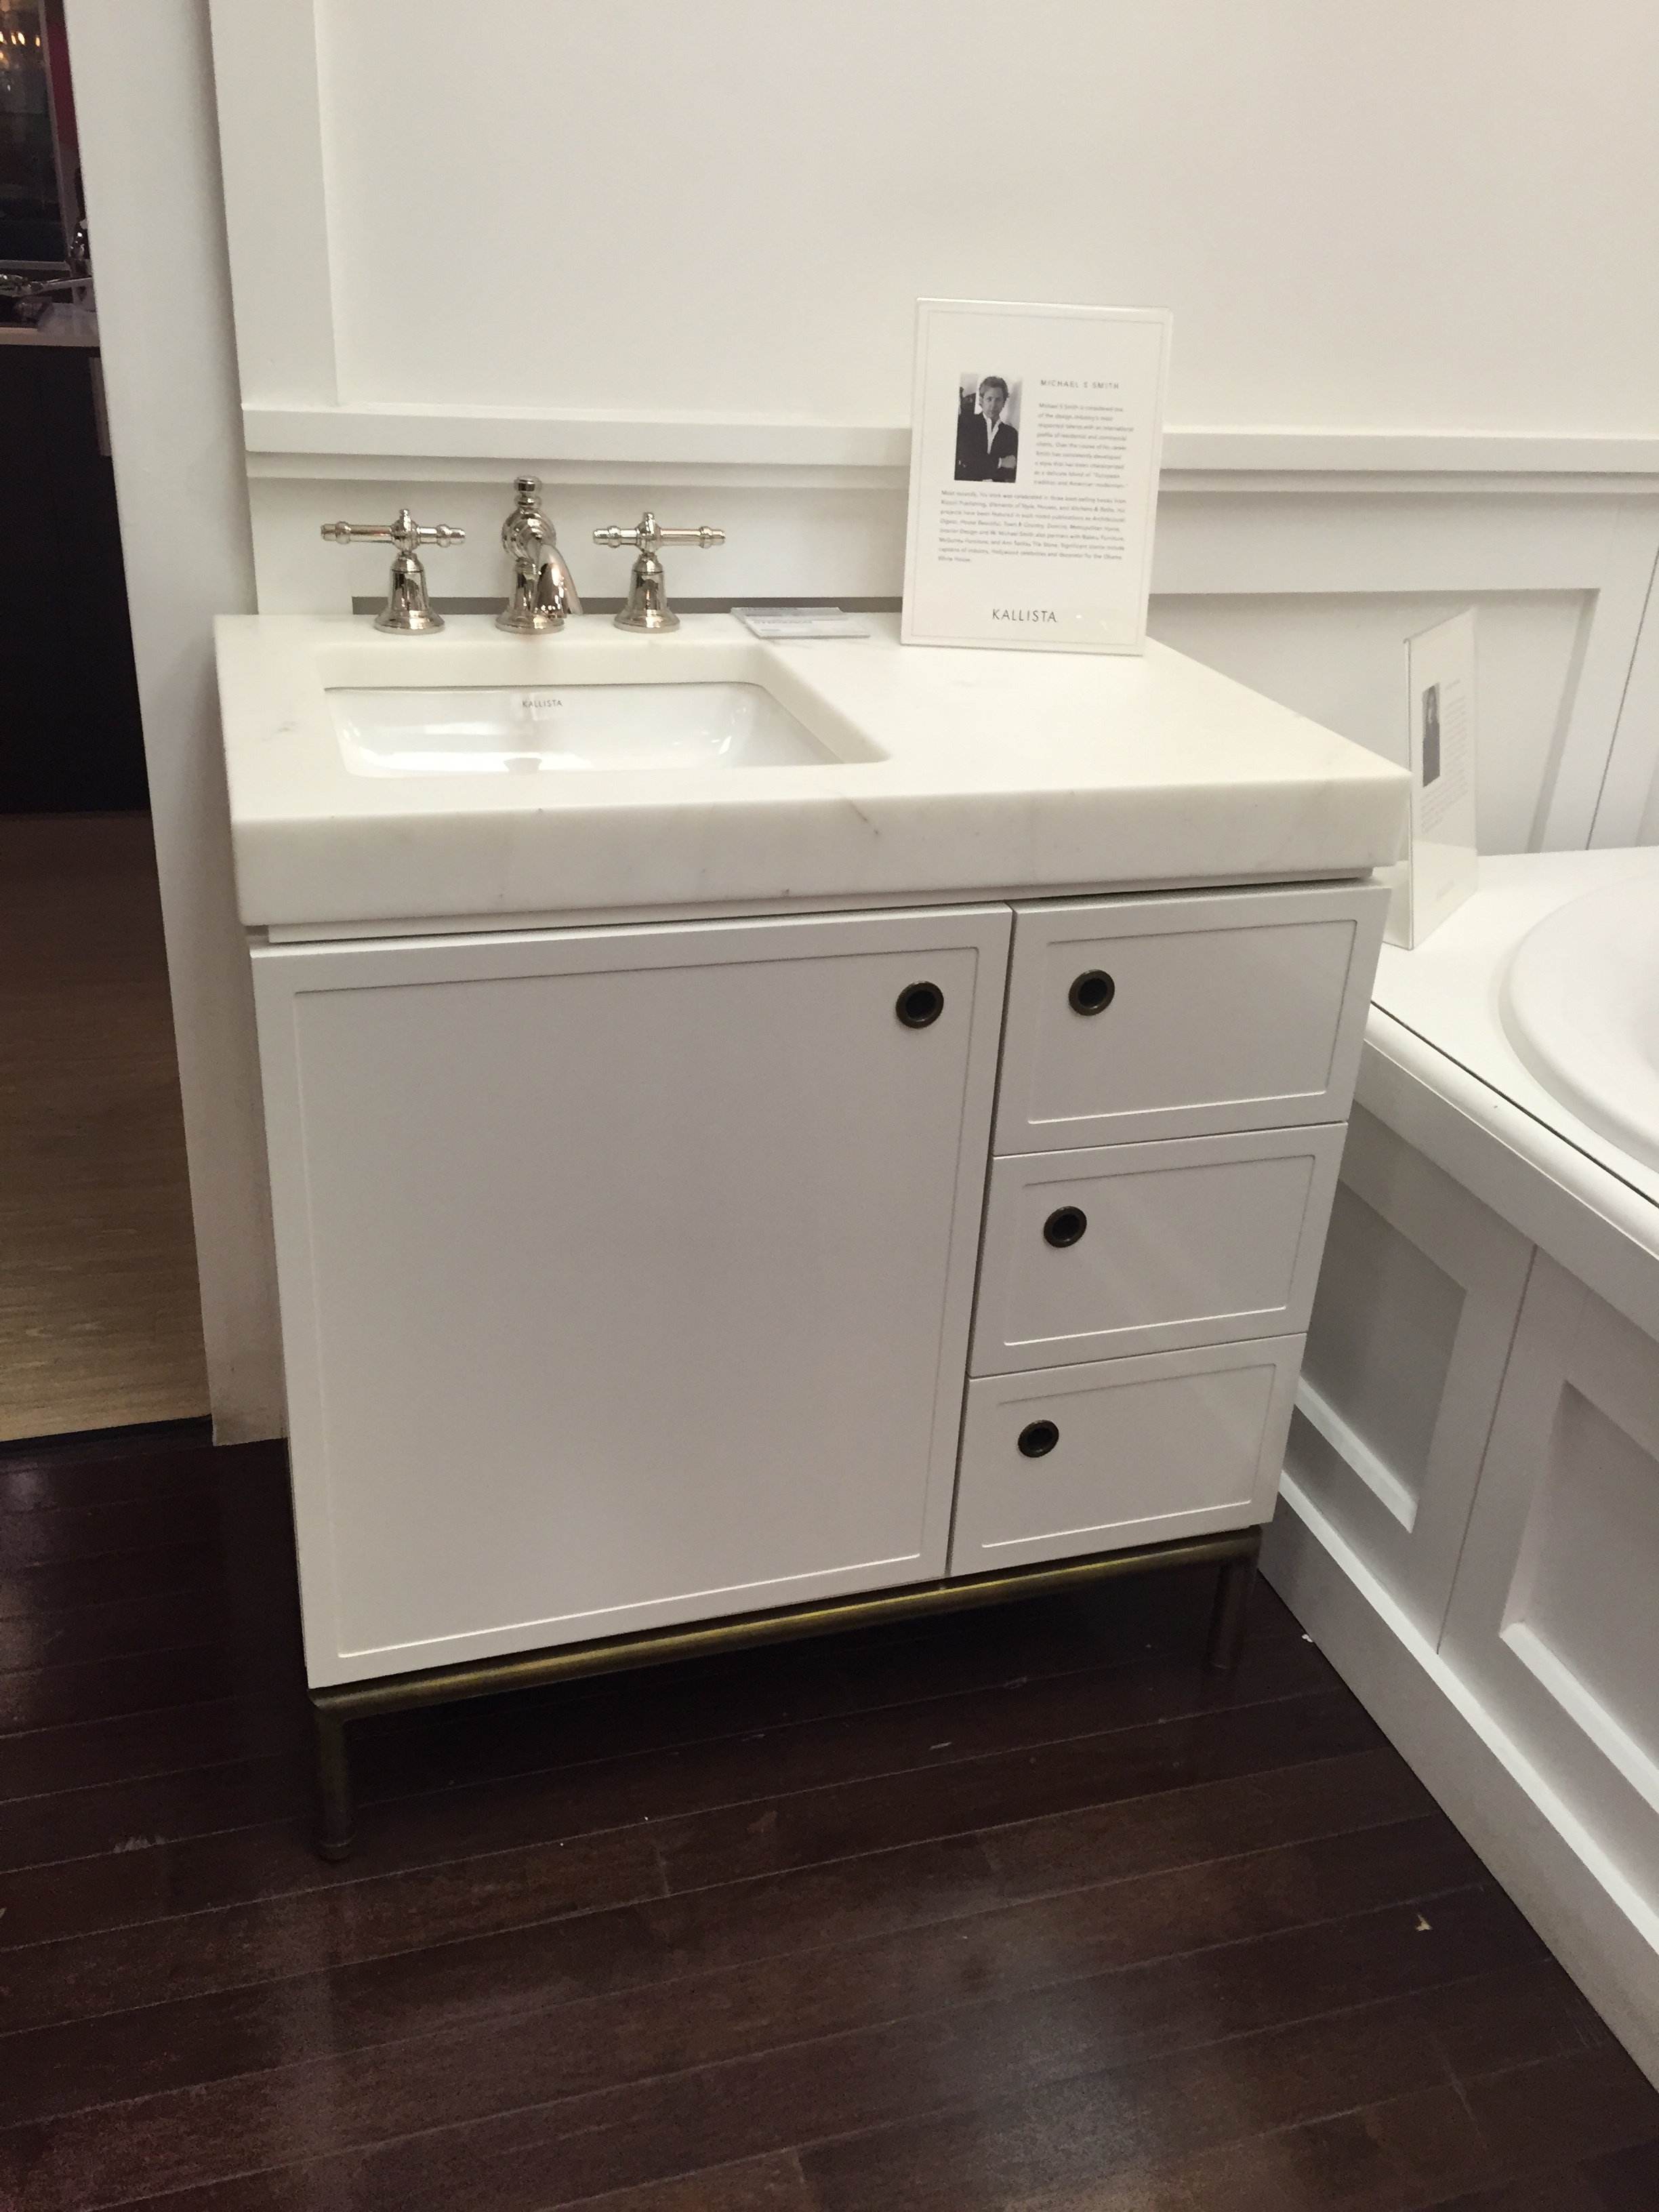 I have admired this Kalista vanity for years. And who won't want that slab of marble? 